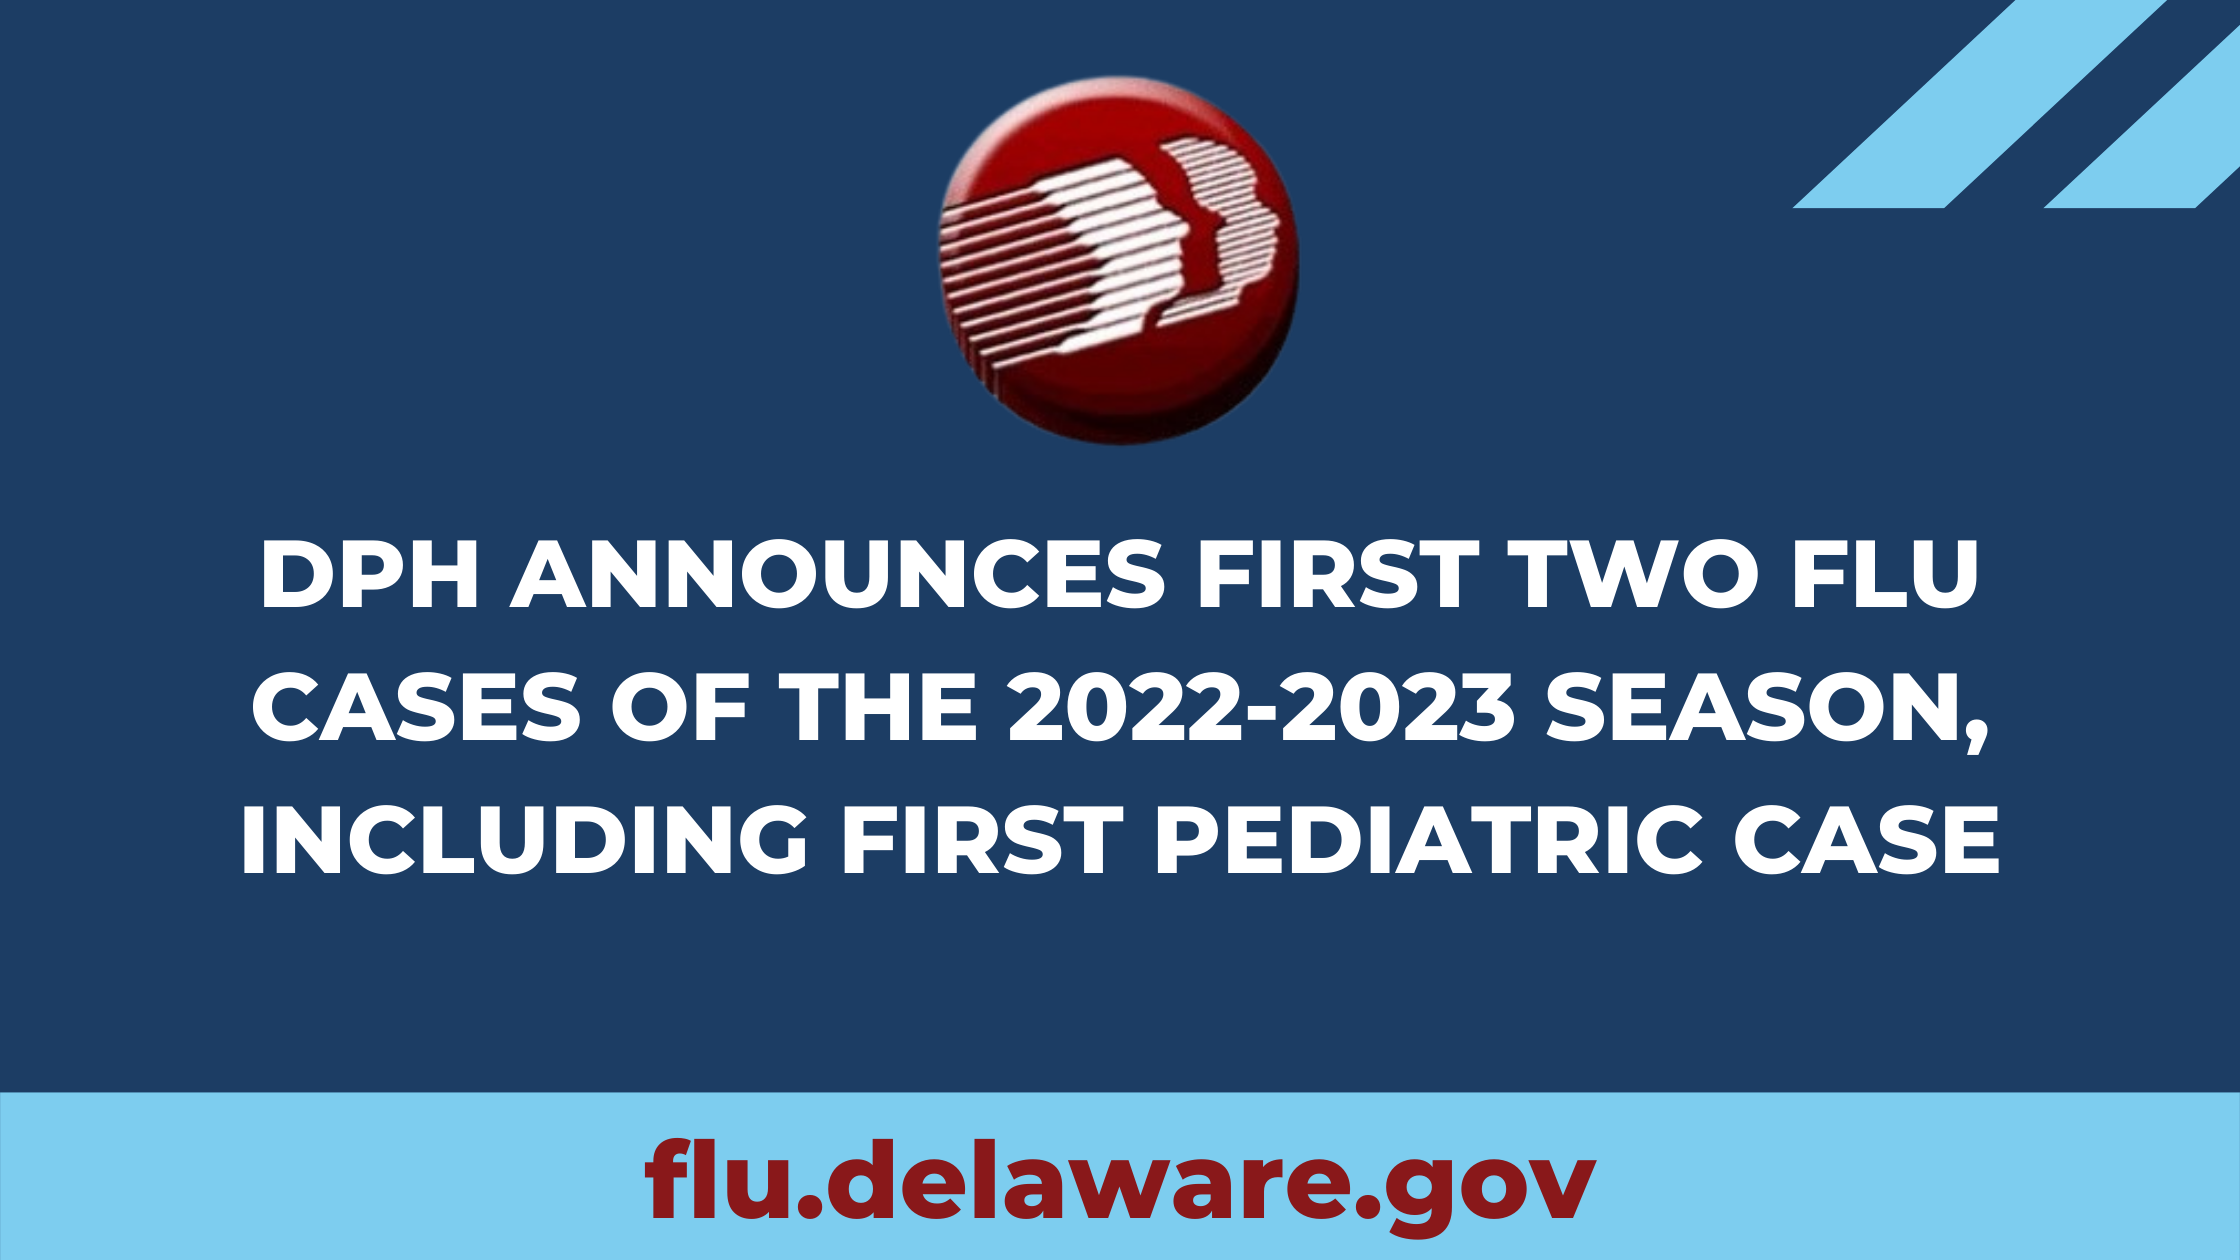 DPH Announces First Two Flu Cases Of The 2022-2023 Season, Including First Pediatric Case